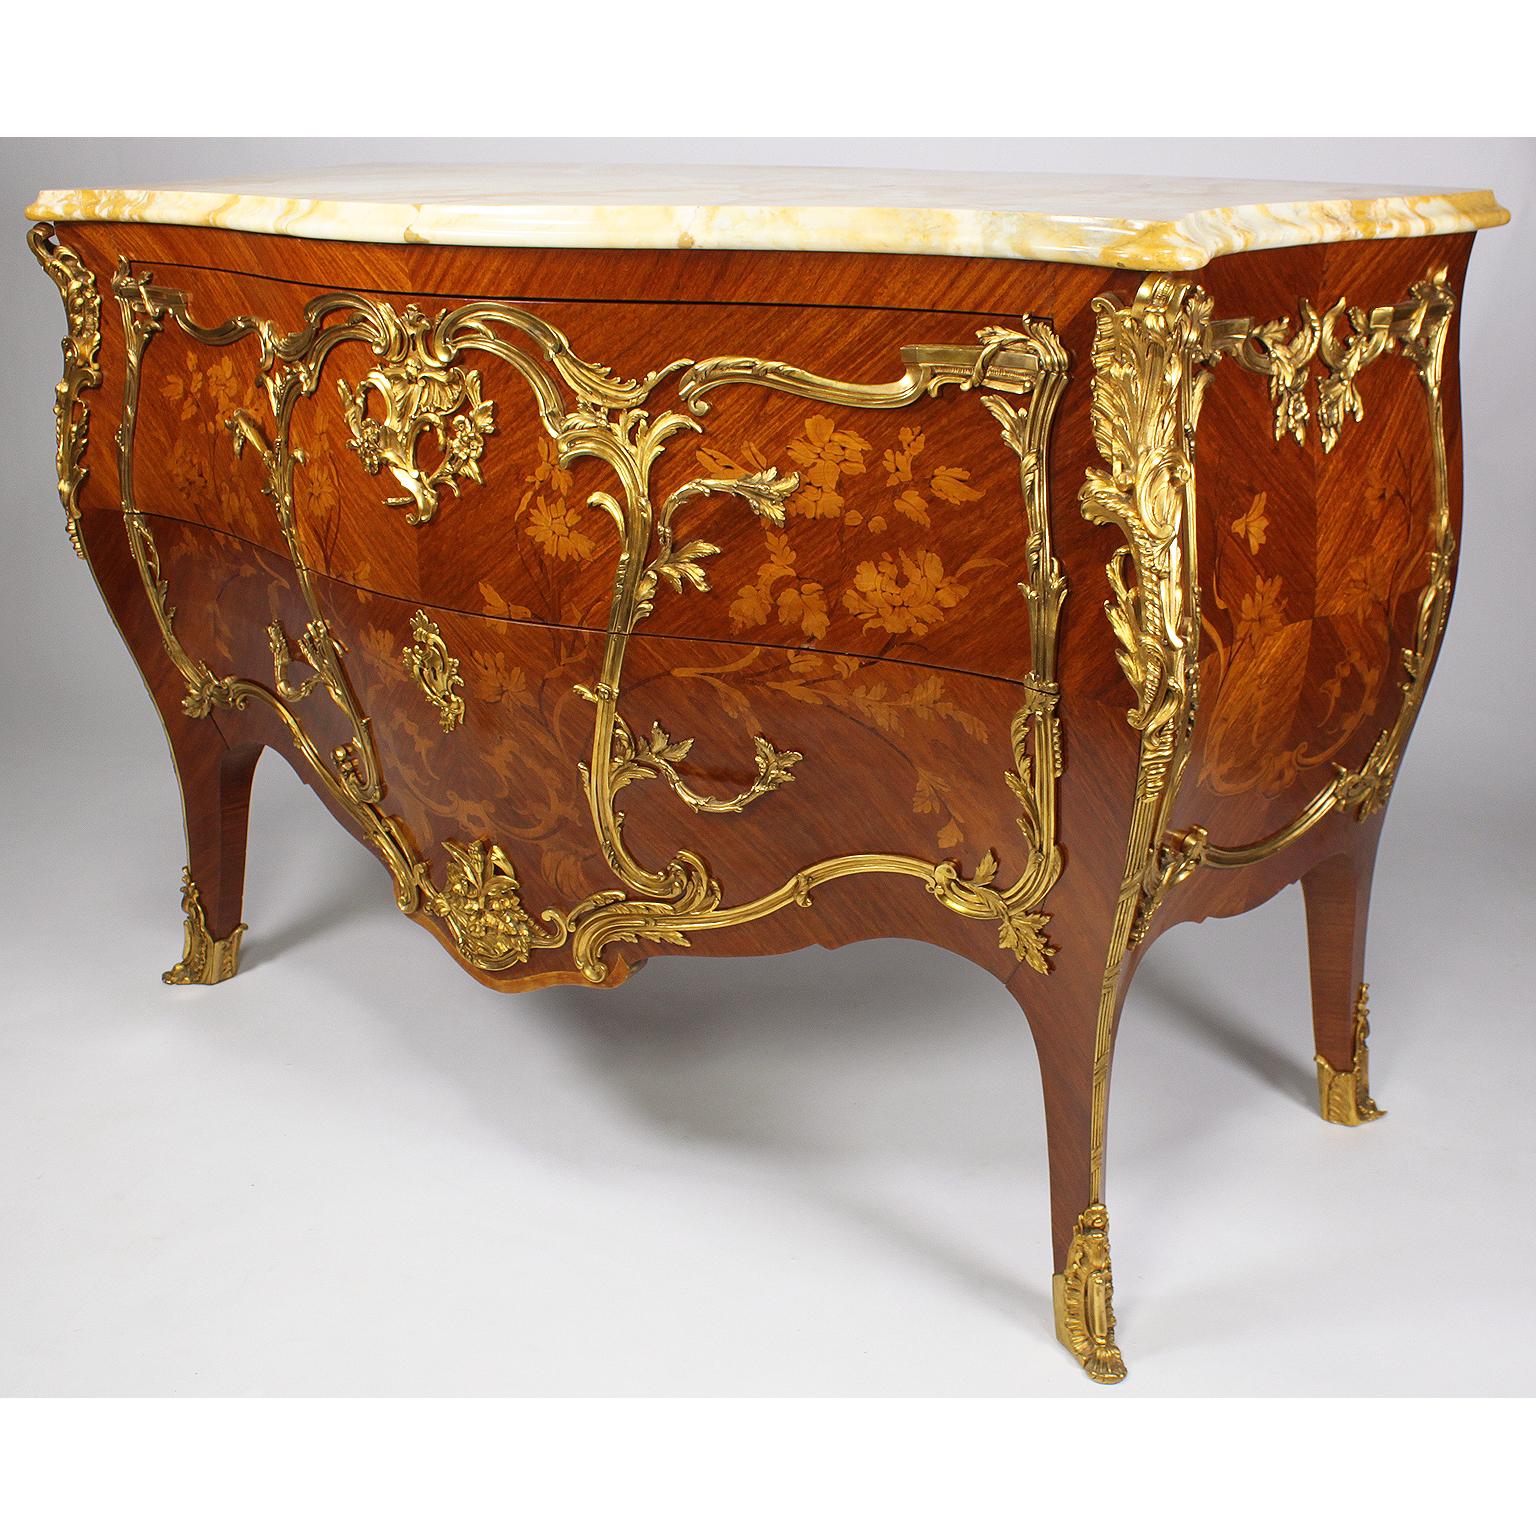 A fine 19th century Louis XV style gilt-bronze mounted kingwood and tulipwood floral marquetry Bombé two-drawer commode with a Royal veined yellow marble top. The serpentine body with two front drawers and surmounted with floral and acanthus banded